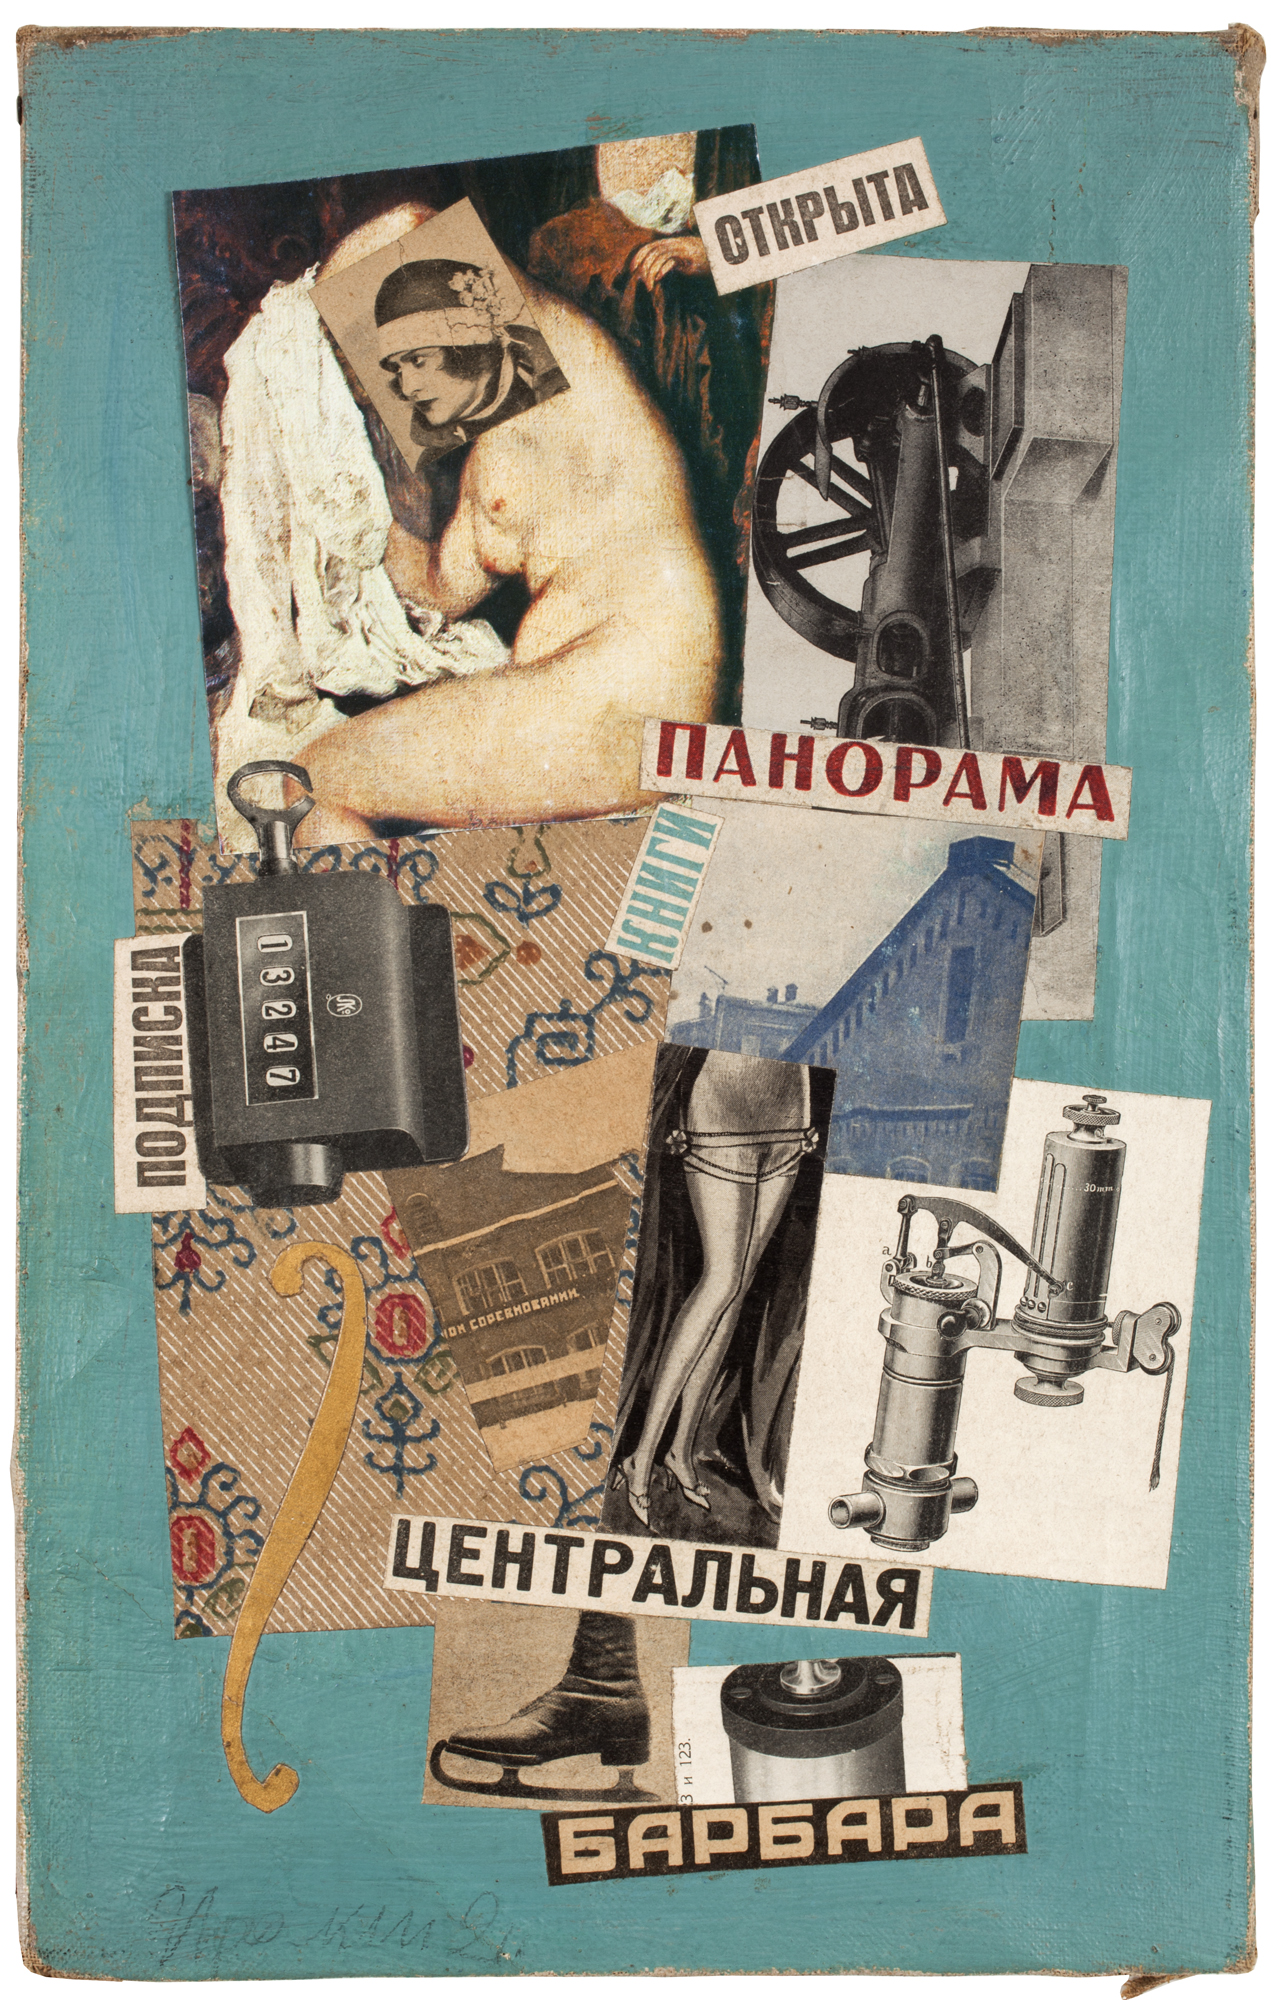  Unattributed. Unsigned.&nbsp;In the style of Alexander Rodchenko.&nbsp;Text in Russian, lower left front corner,&nbsp;translates to “Project 2”.&nbsp;Mixed media on canvas. 34 x 24 cm. 